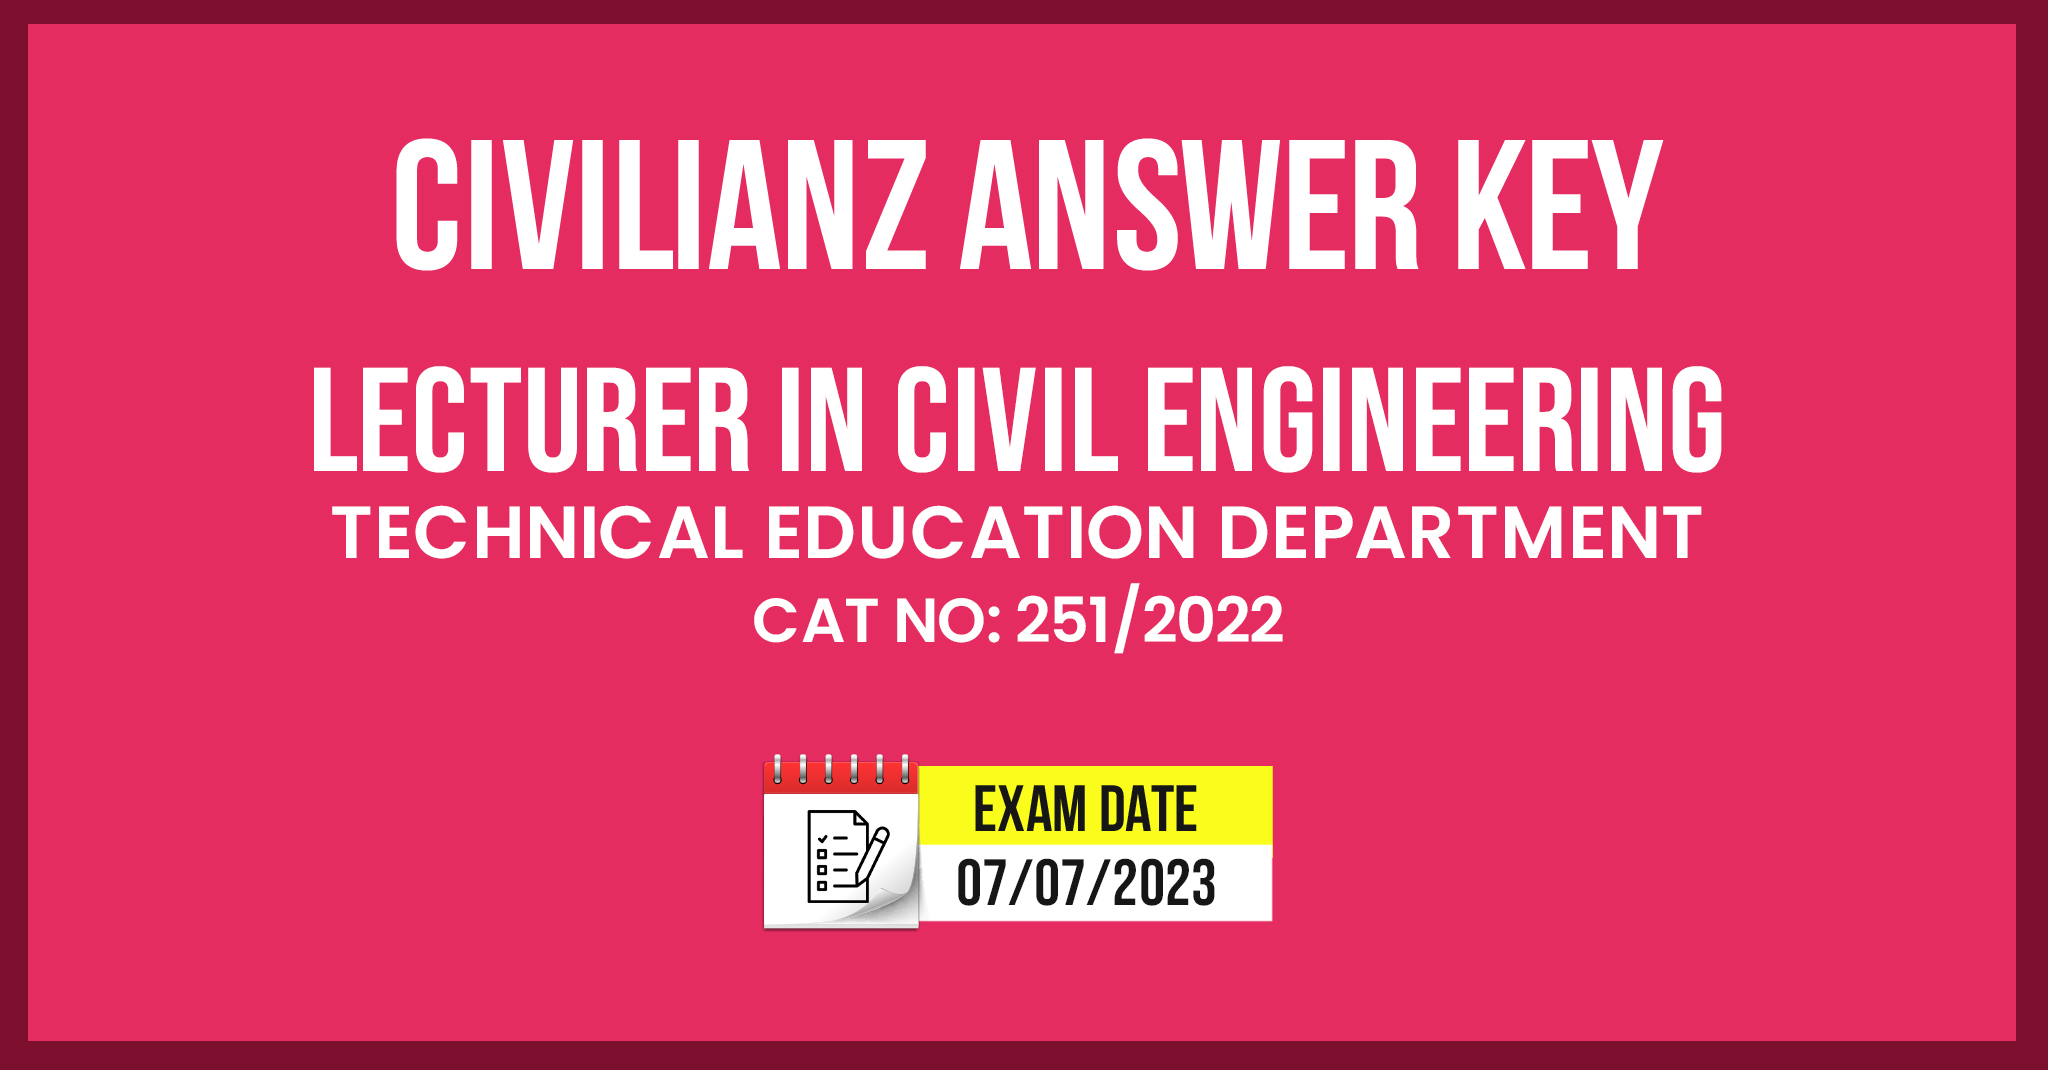 LECTURER IN CIVIL ENGINEERING-CIVILIANZ ANSWER KEY